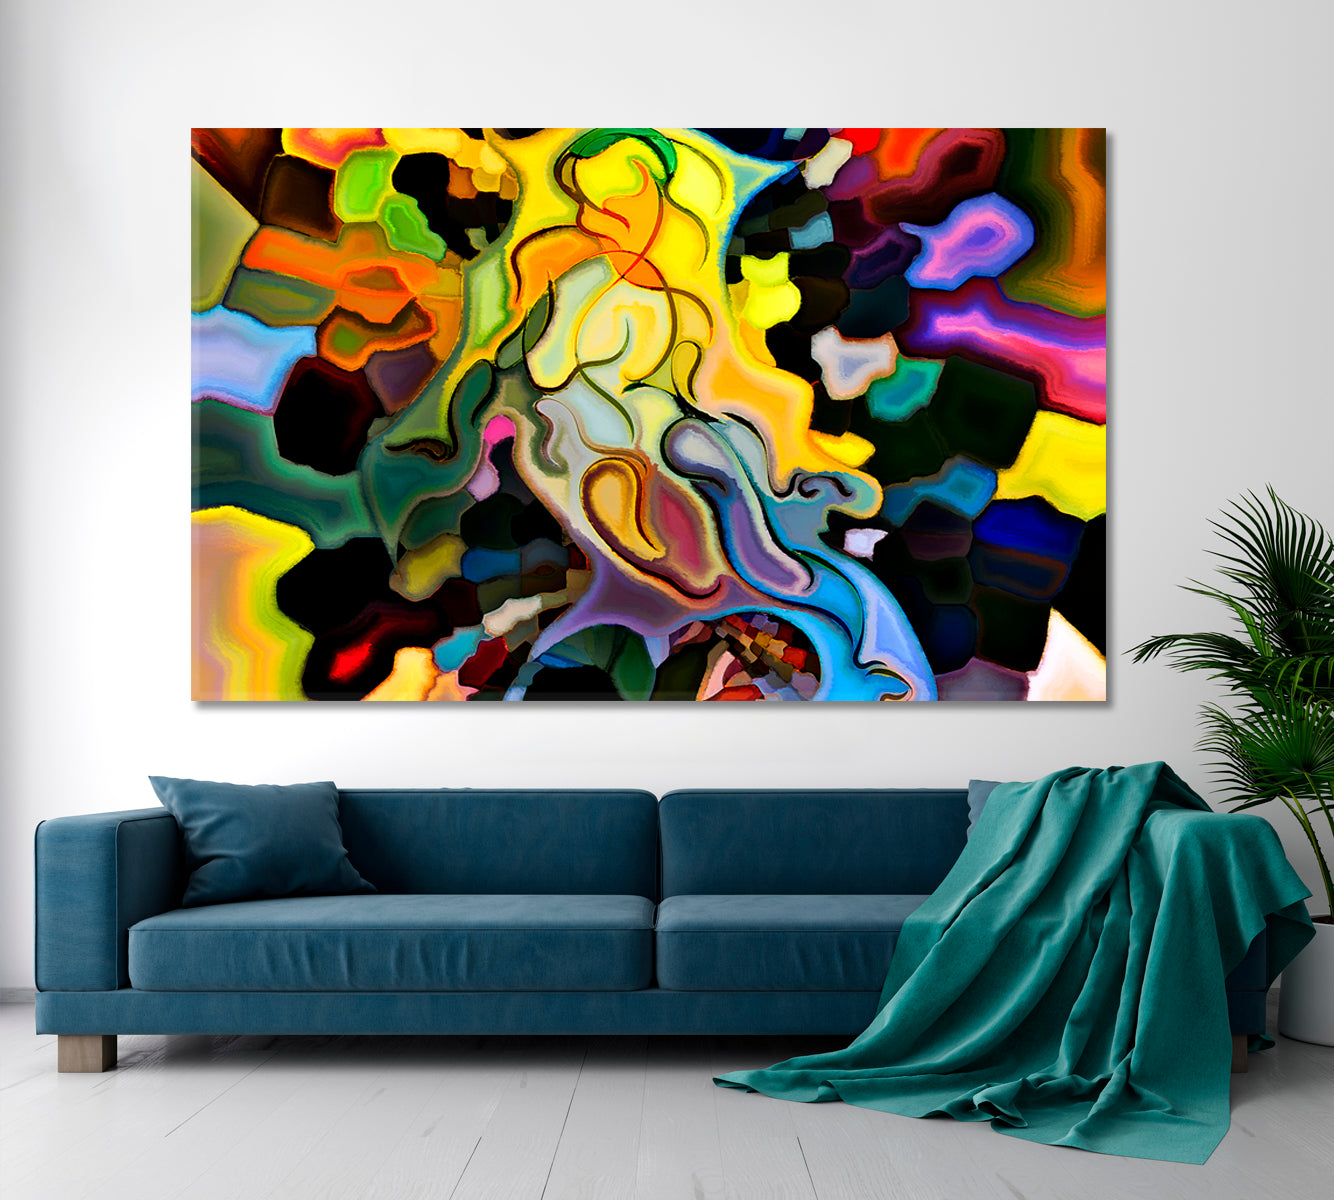 Human and Geometric Forms Collection Abstract Creativity and Imagination Abstract Art Print Artesty 1 panel 24" x 16" 